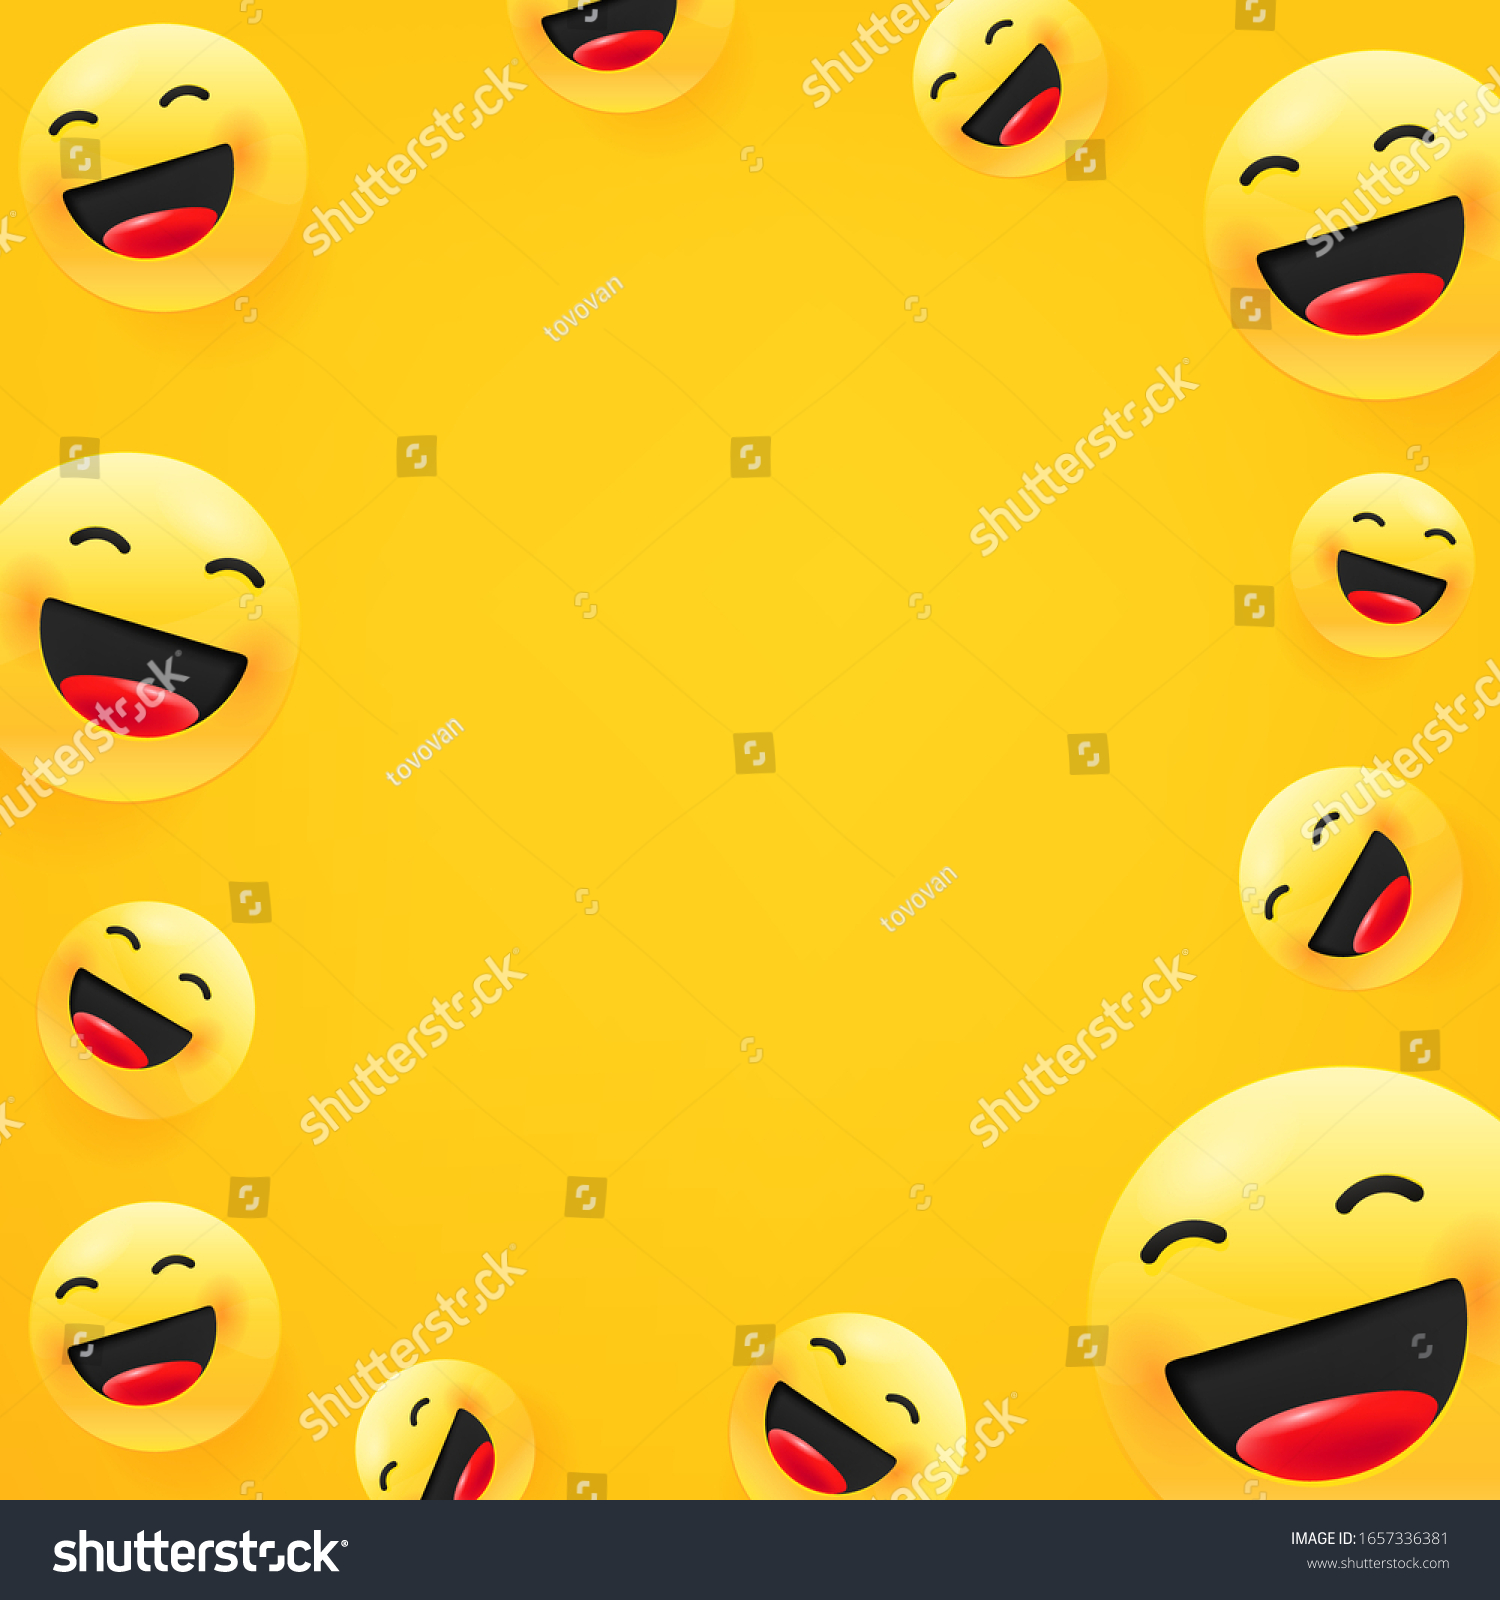 Laughing emoji. Social media message vector background. Copy space for a text #1657336381